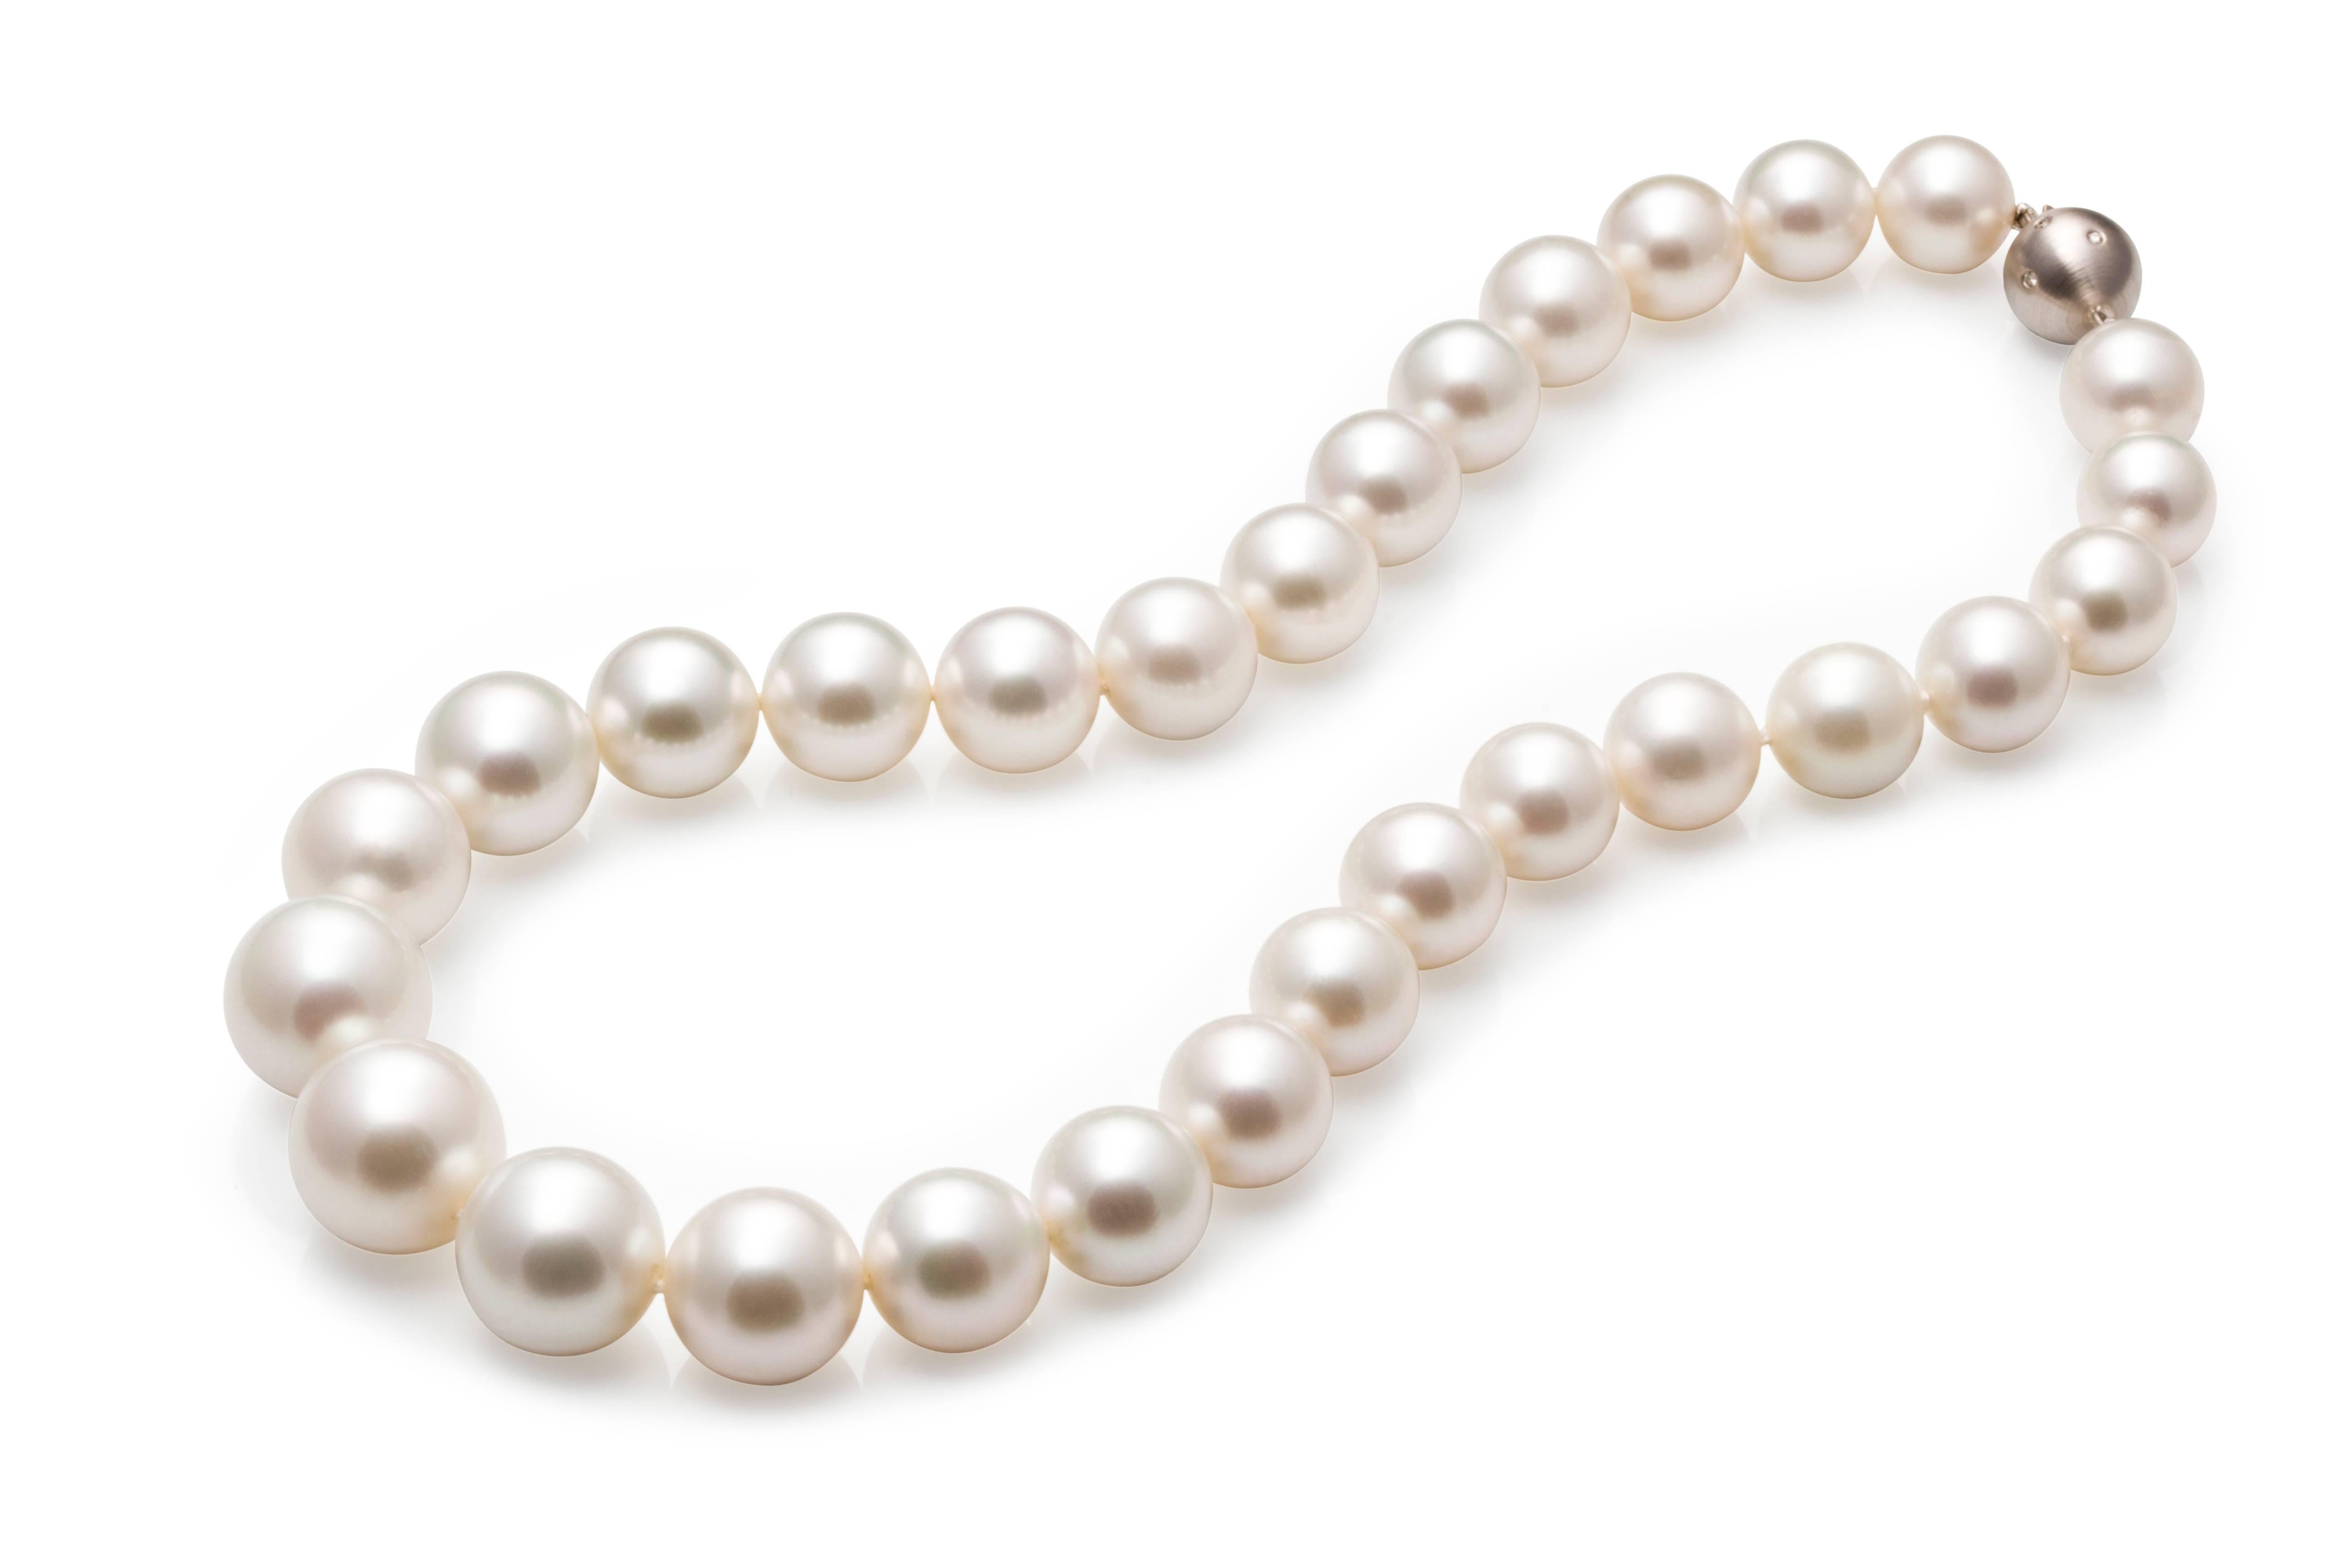 Stunning Australian South Sea pearls...

This large sized strand of pearls with sizes from 13mm/0.51 inches at the clasp to a center front pearl of 18.7mm/0.73 inches 

All pearls are round in shape and very evenly matched in their luster, surface